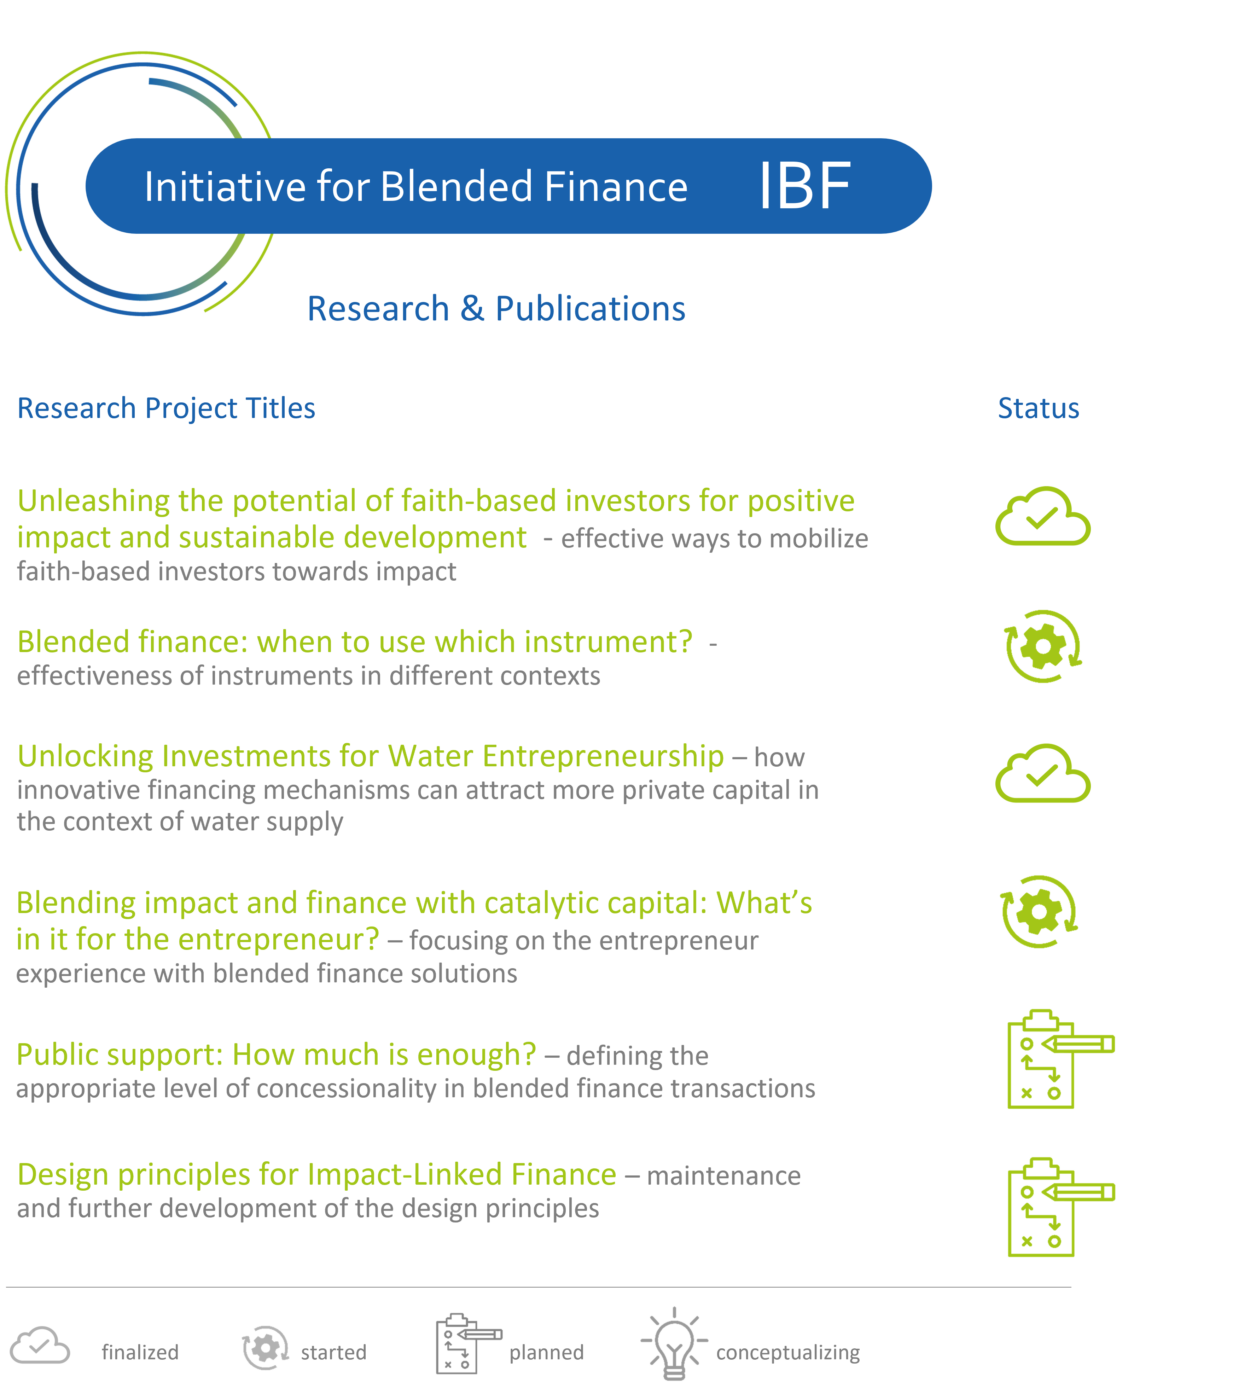 IBF Research & Publications 2022